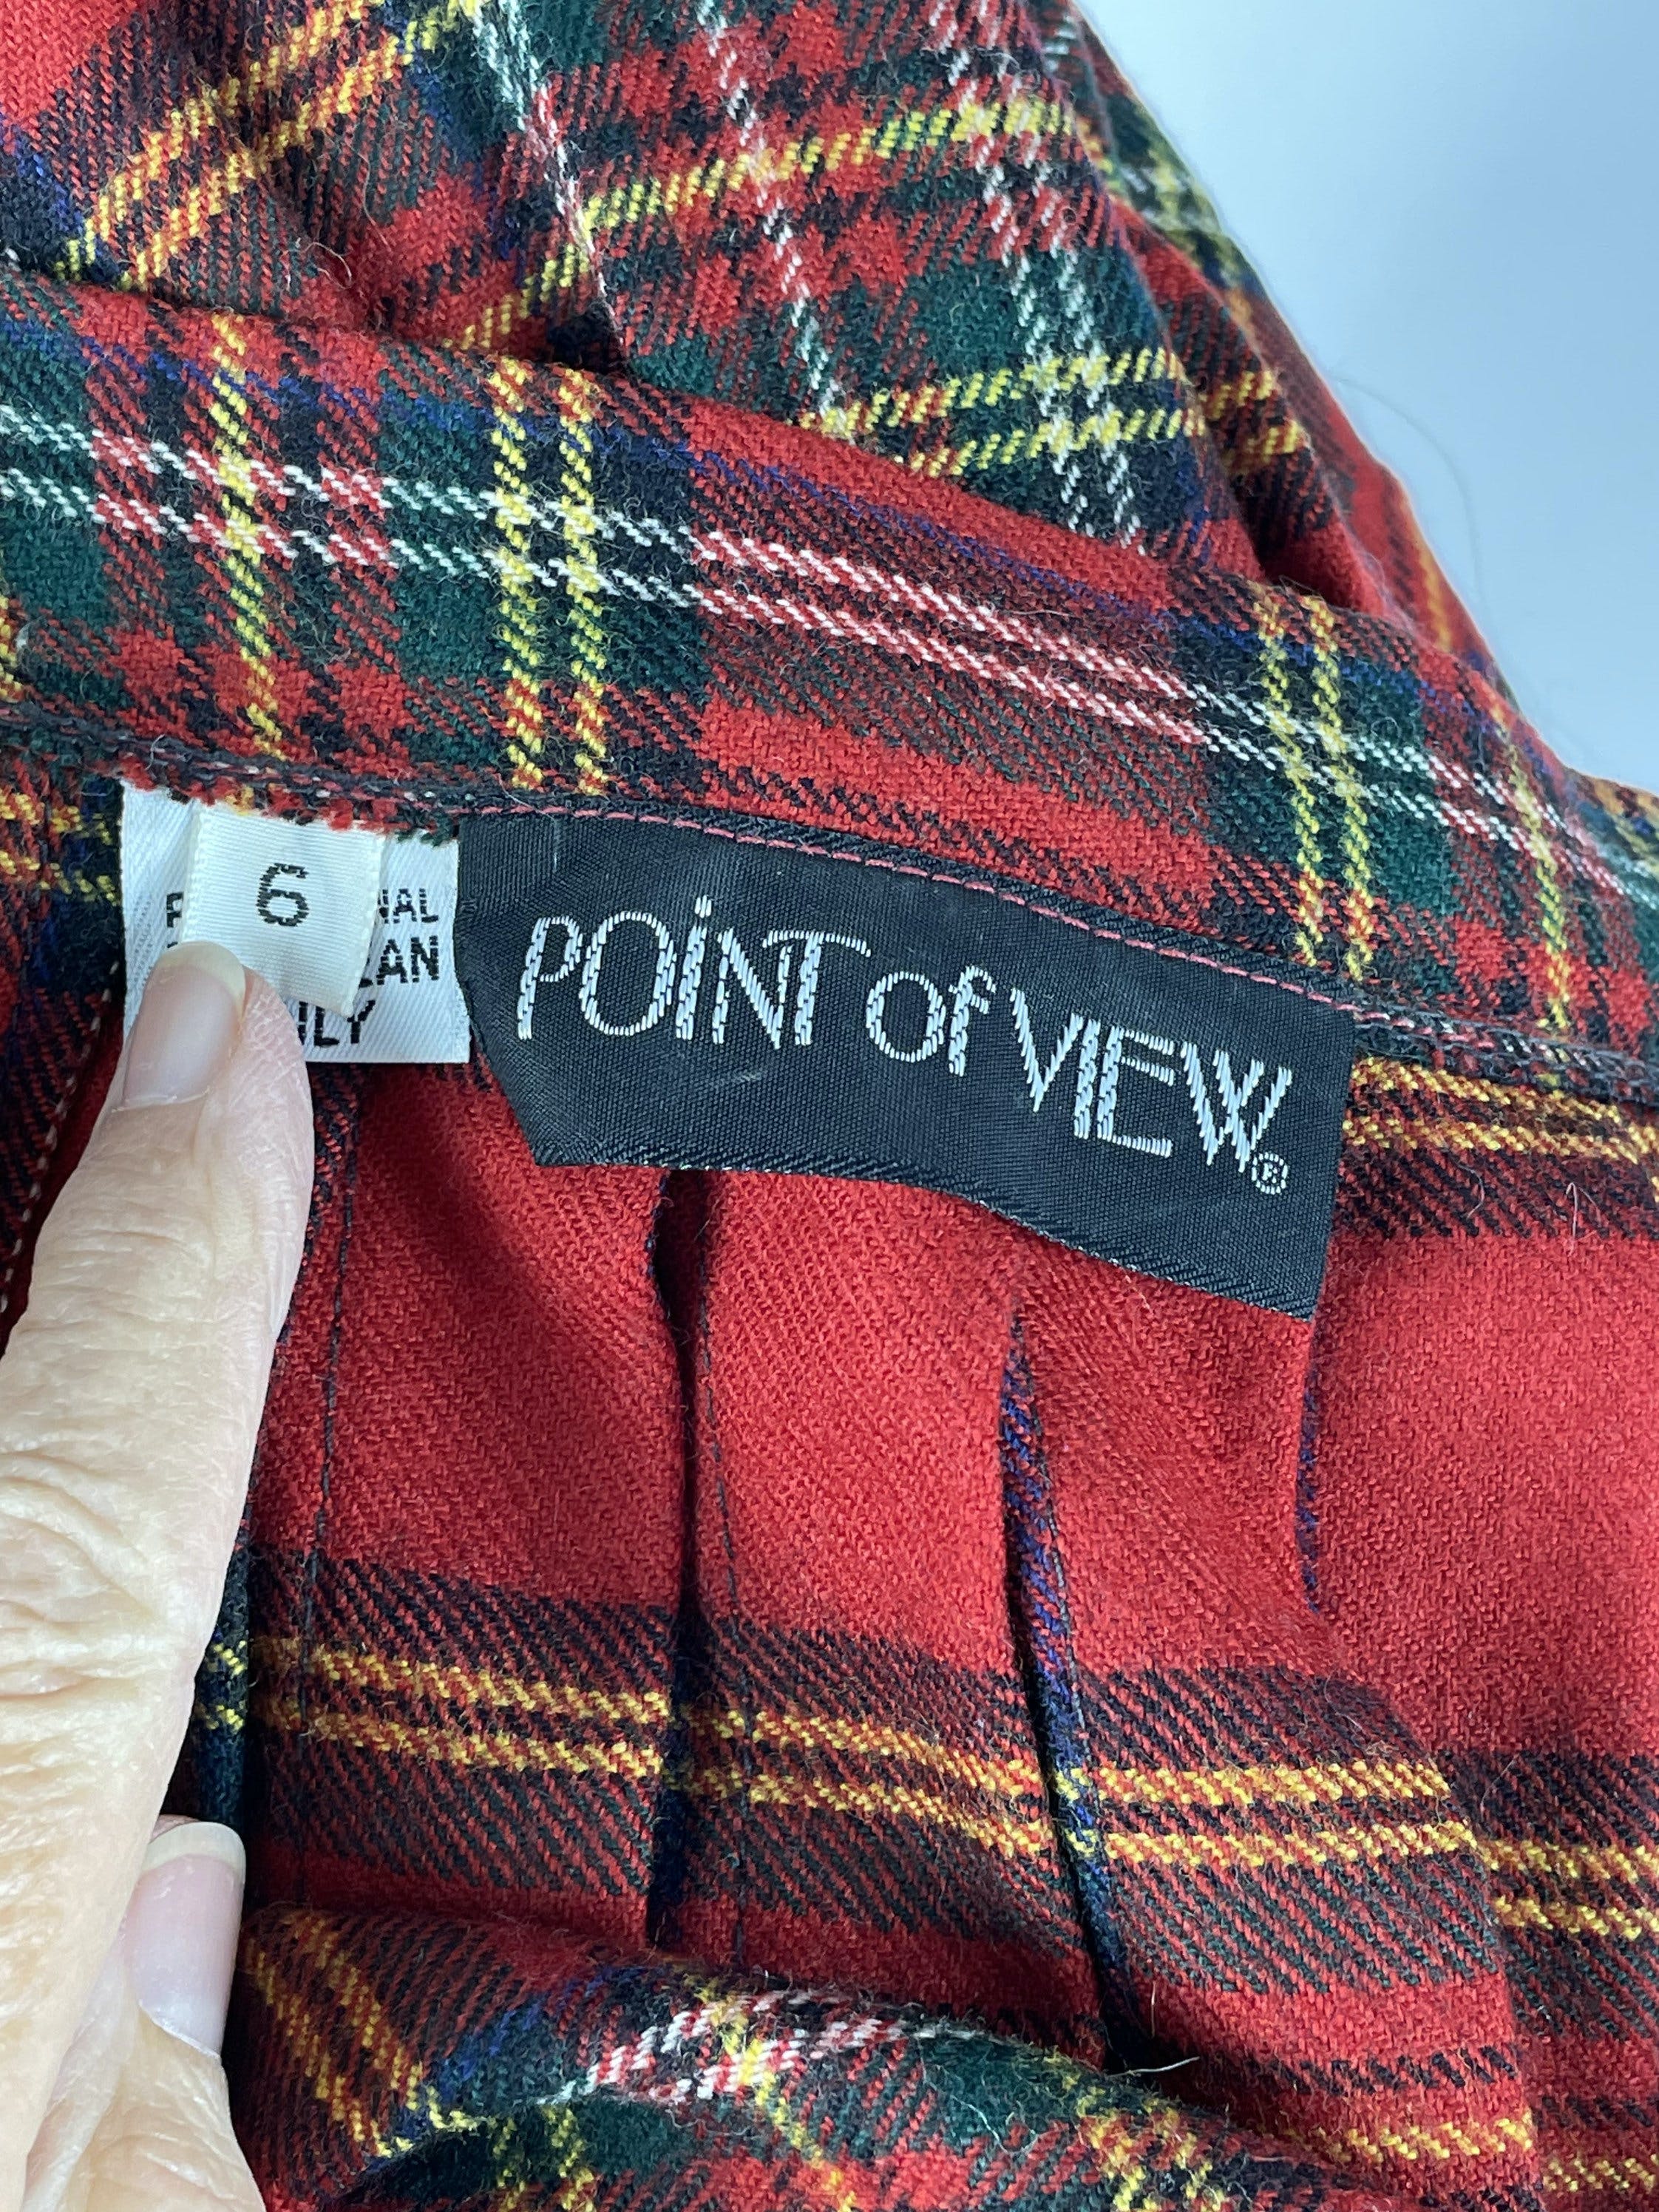 Vintage Red Tartan Plaid Pleated Kilt by Point of View | Shop THRILLING